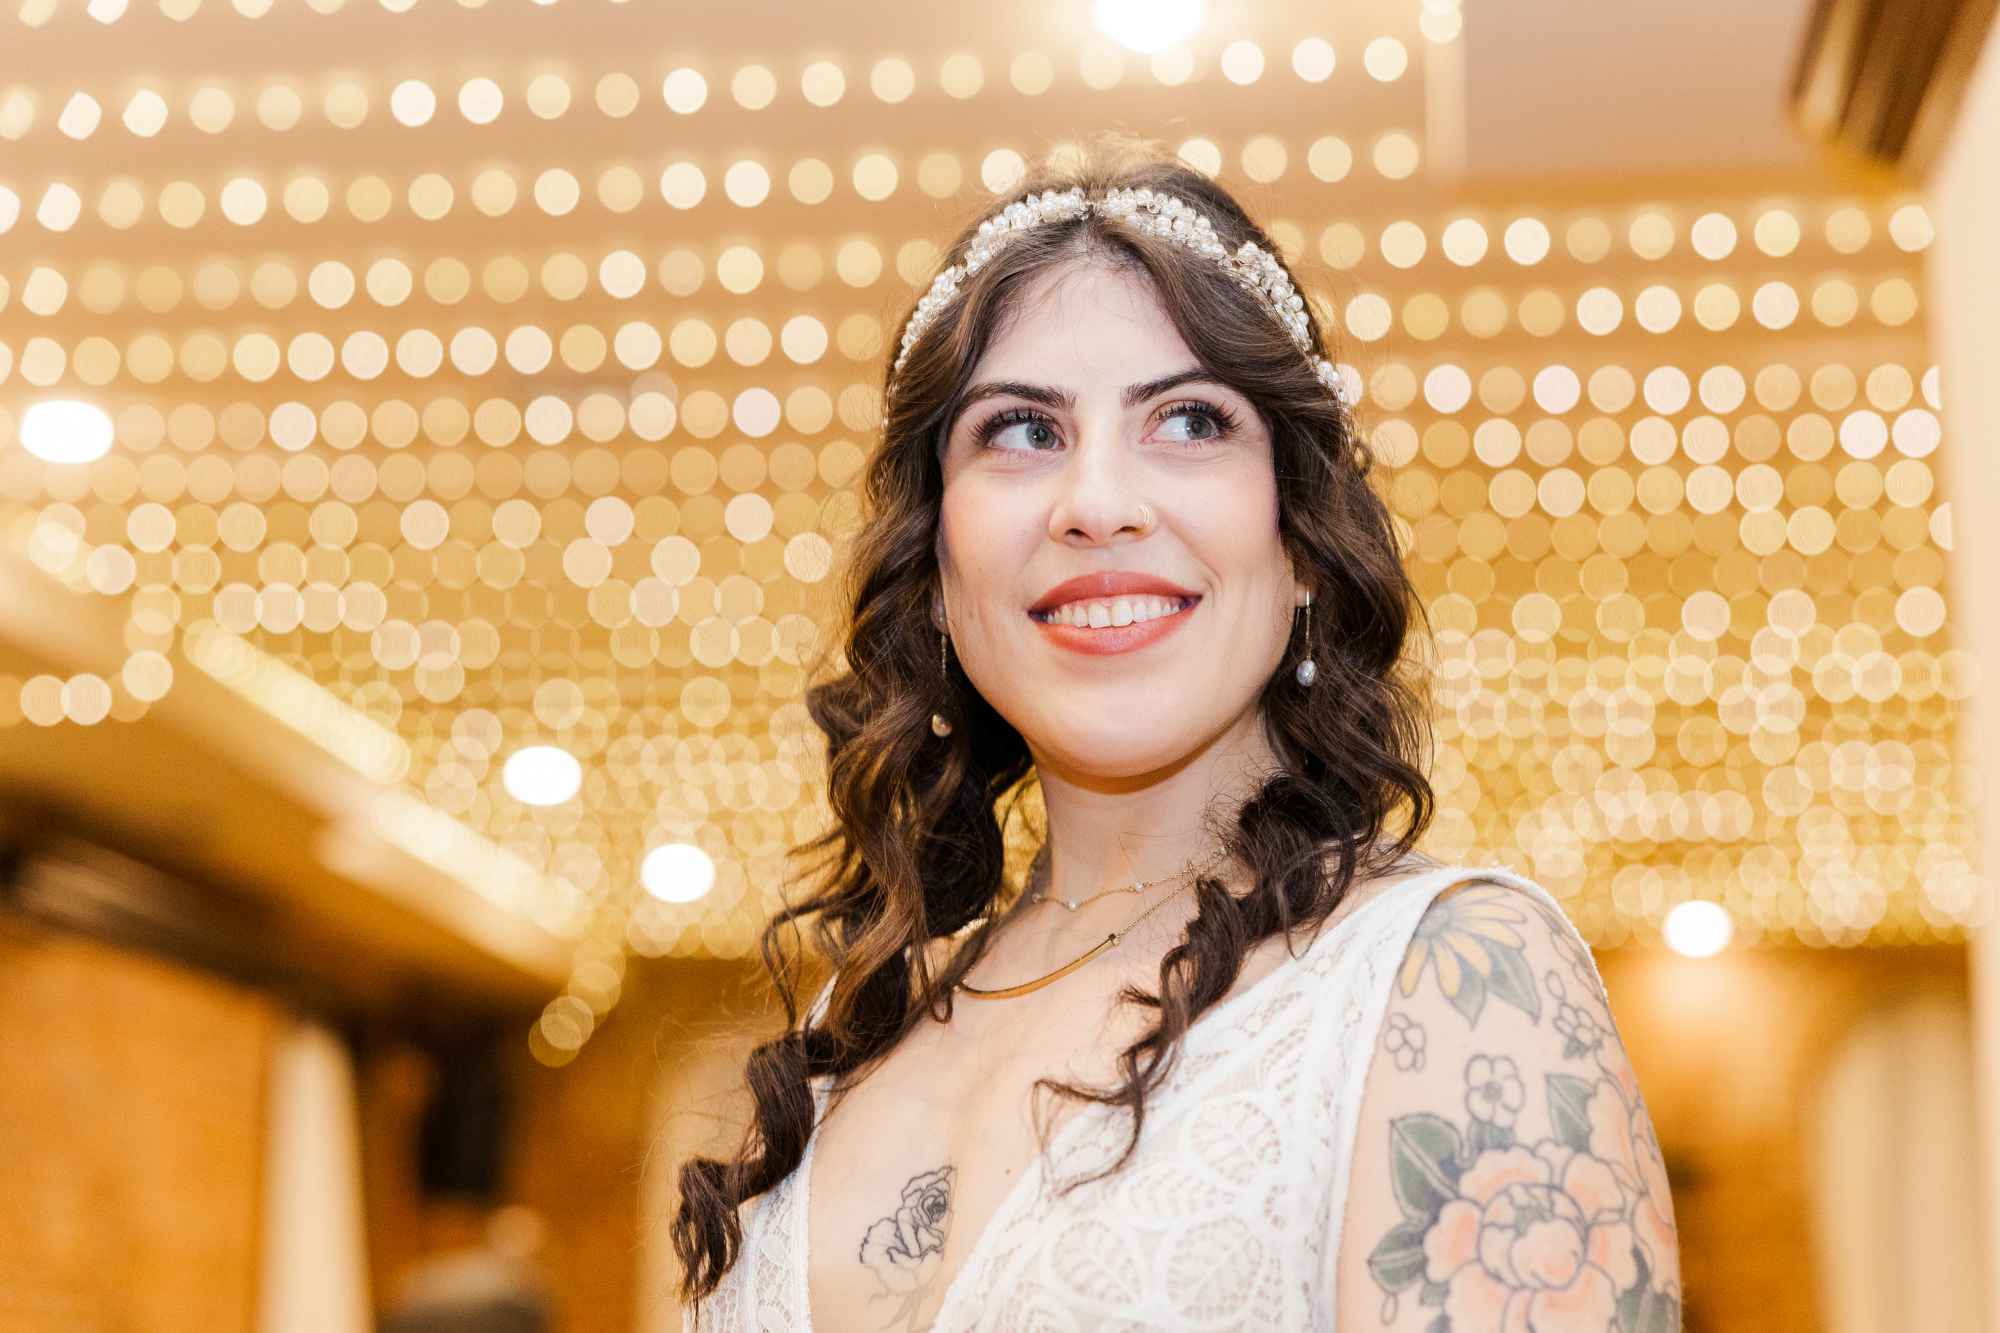 Beautiful Deity Wedding Photography at Unique Event Space in Downtown Brooklyn in Autumn